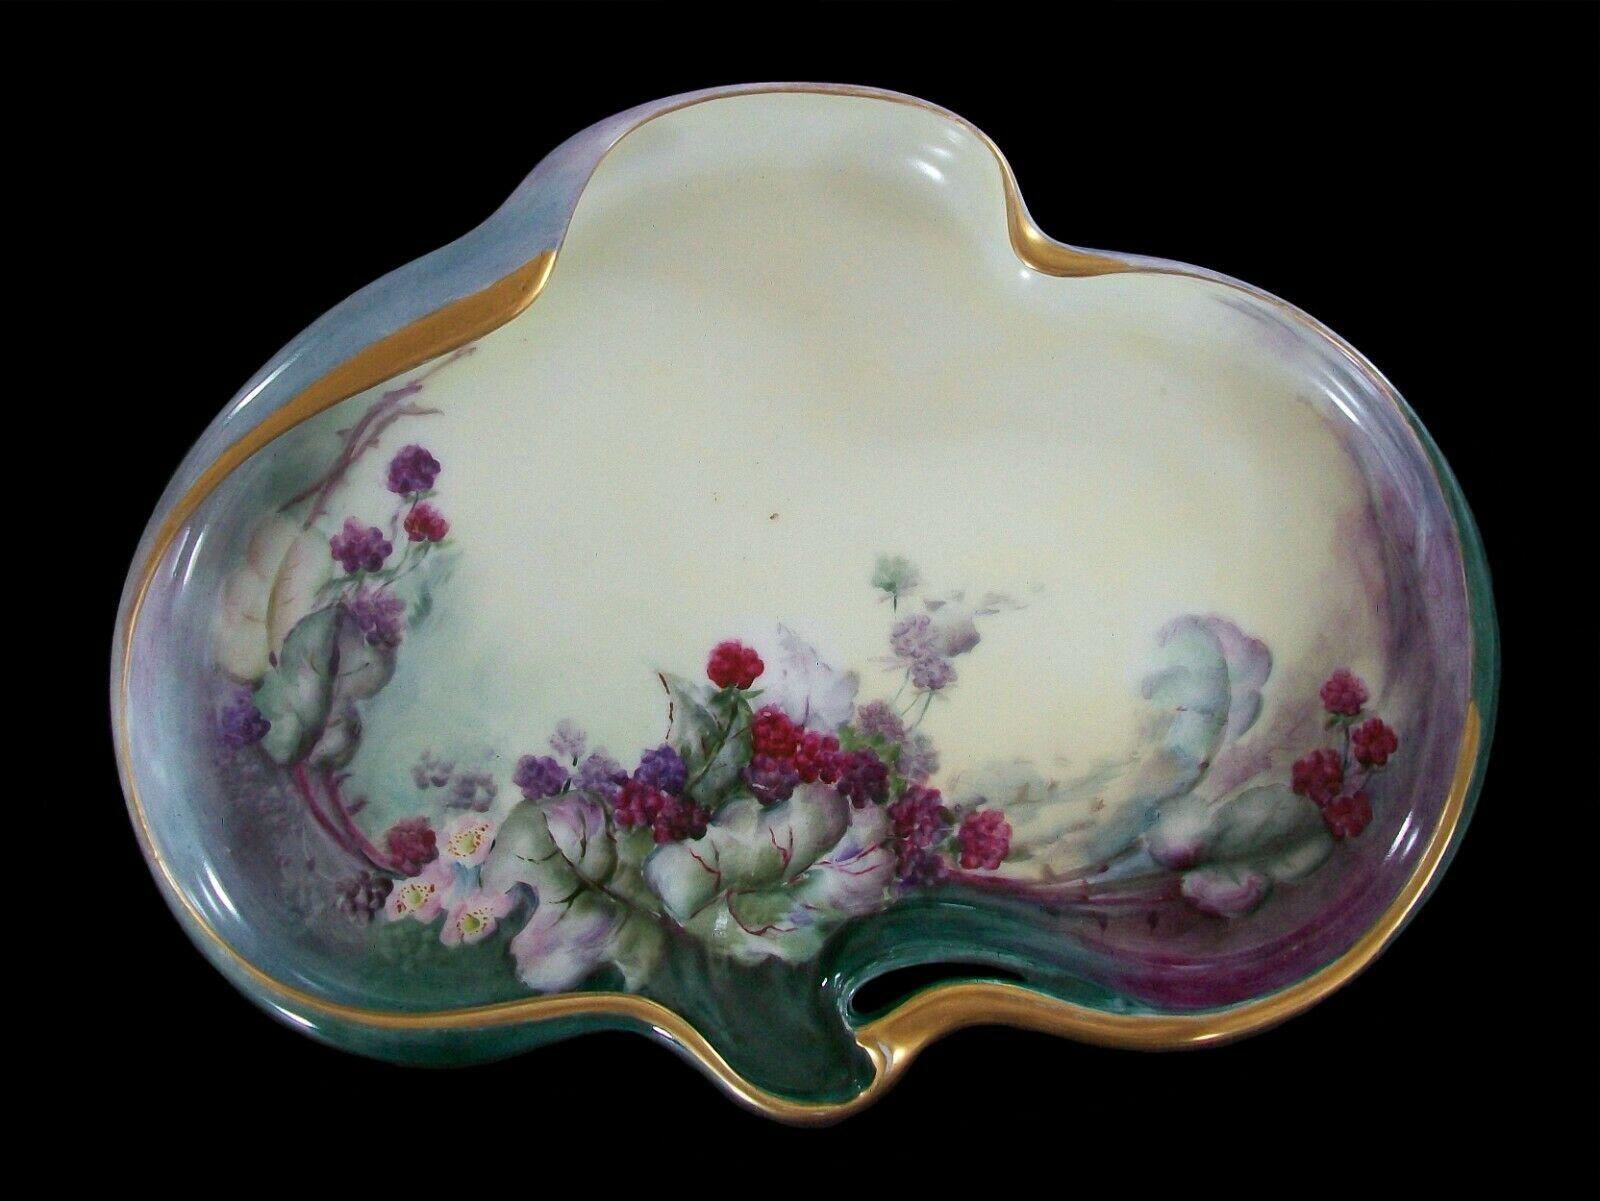 LA SEYNIE - Fine antique Limoges ceramic cabinet tray - hand painted in the Art Nouveau style - featuring a display of raspberries with flowers and leaves - gilded edge - back stamp / signed - France - circa 1910.

Excellent antique condition - no